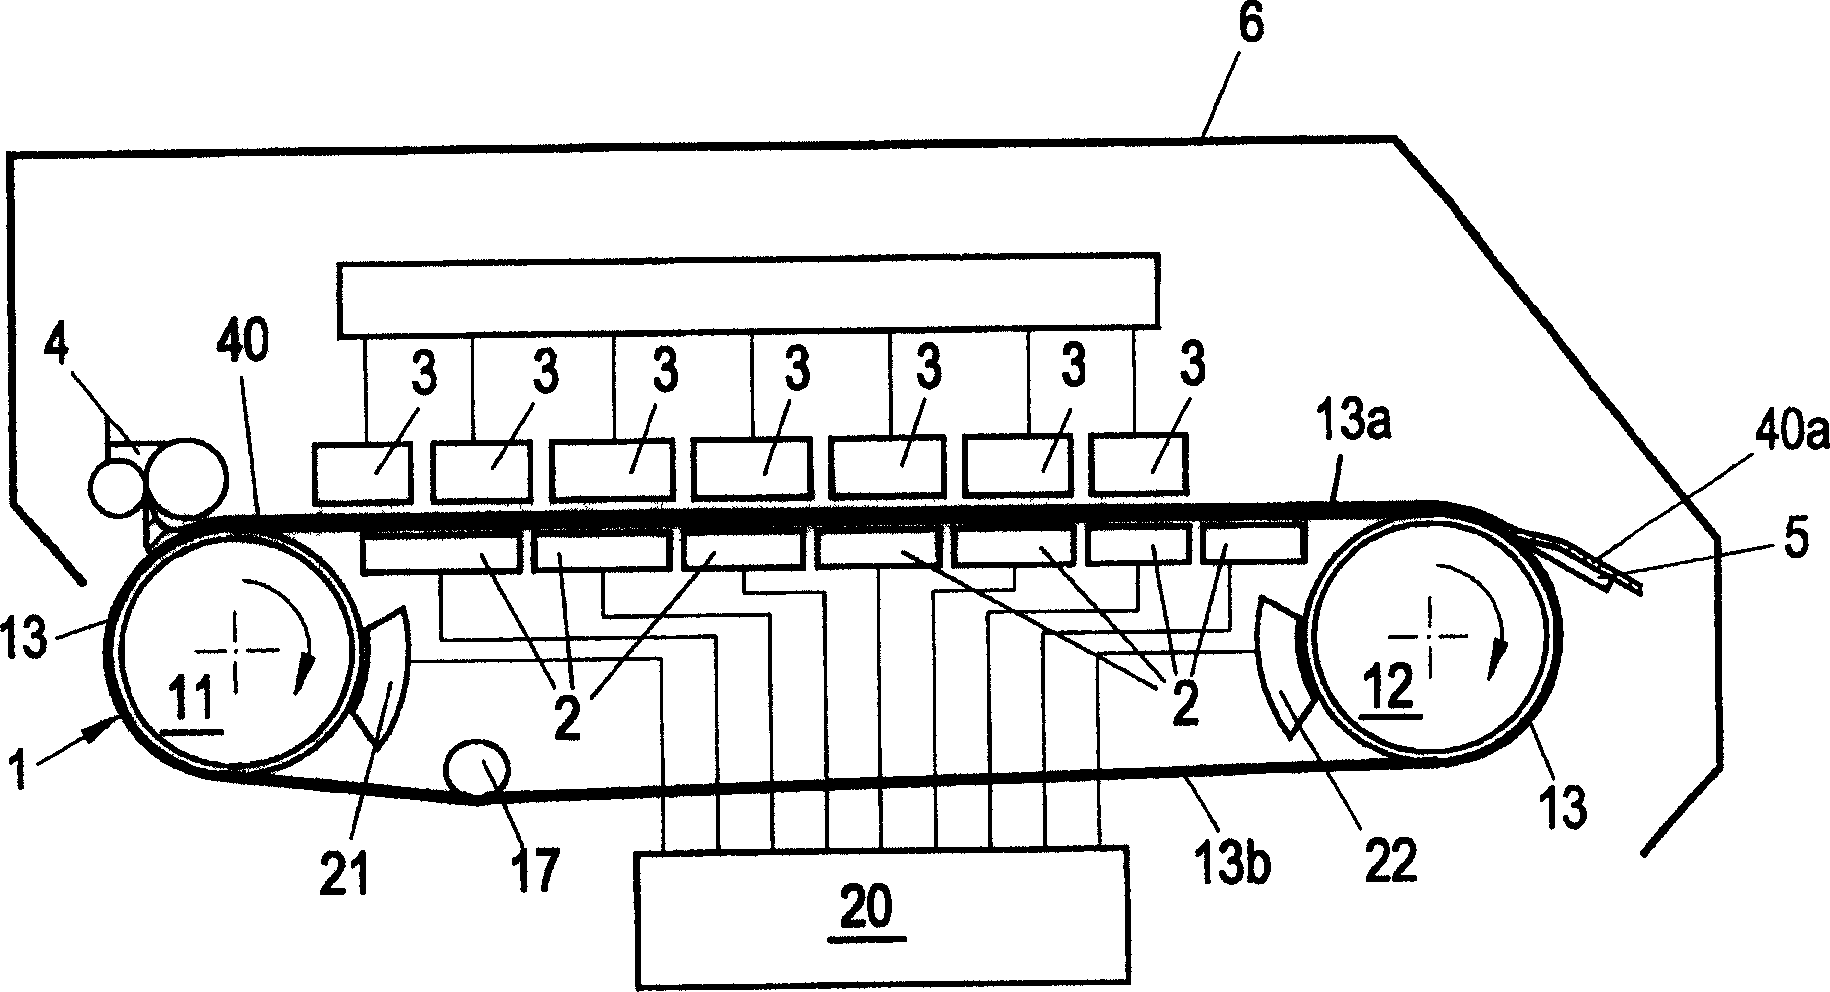 Apparatus for the heat treatment of foodstuffs and feedstuffs, in particular for the production of bakery products